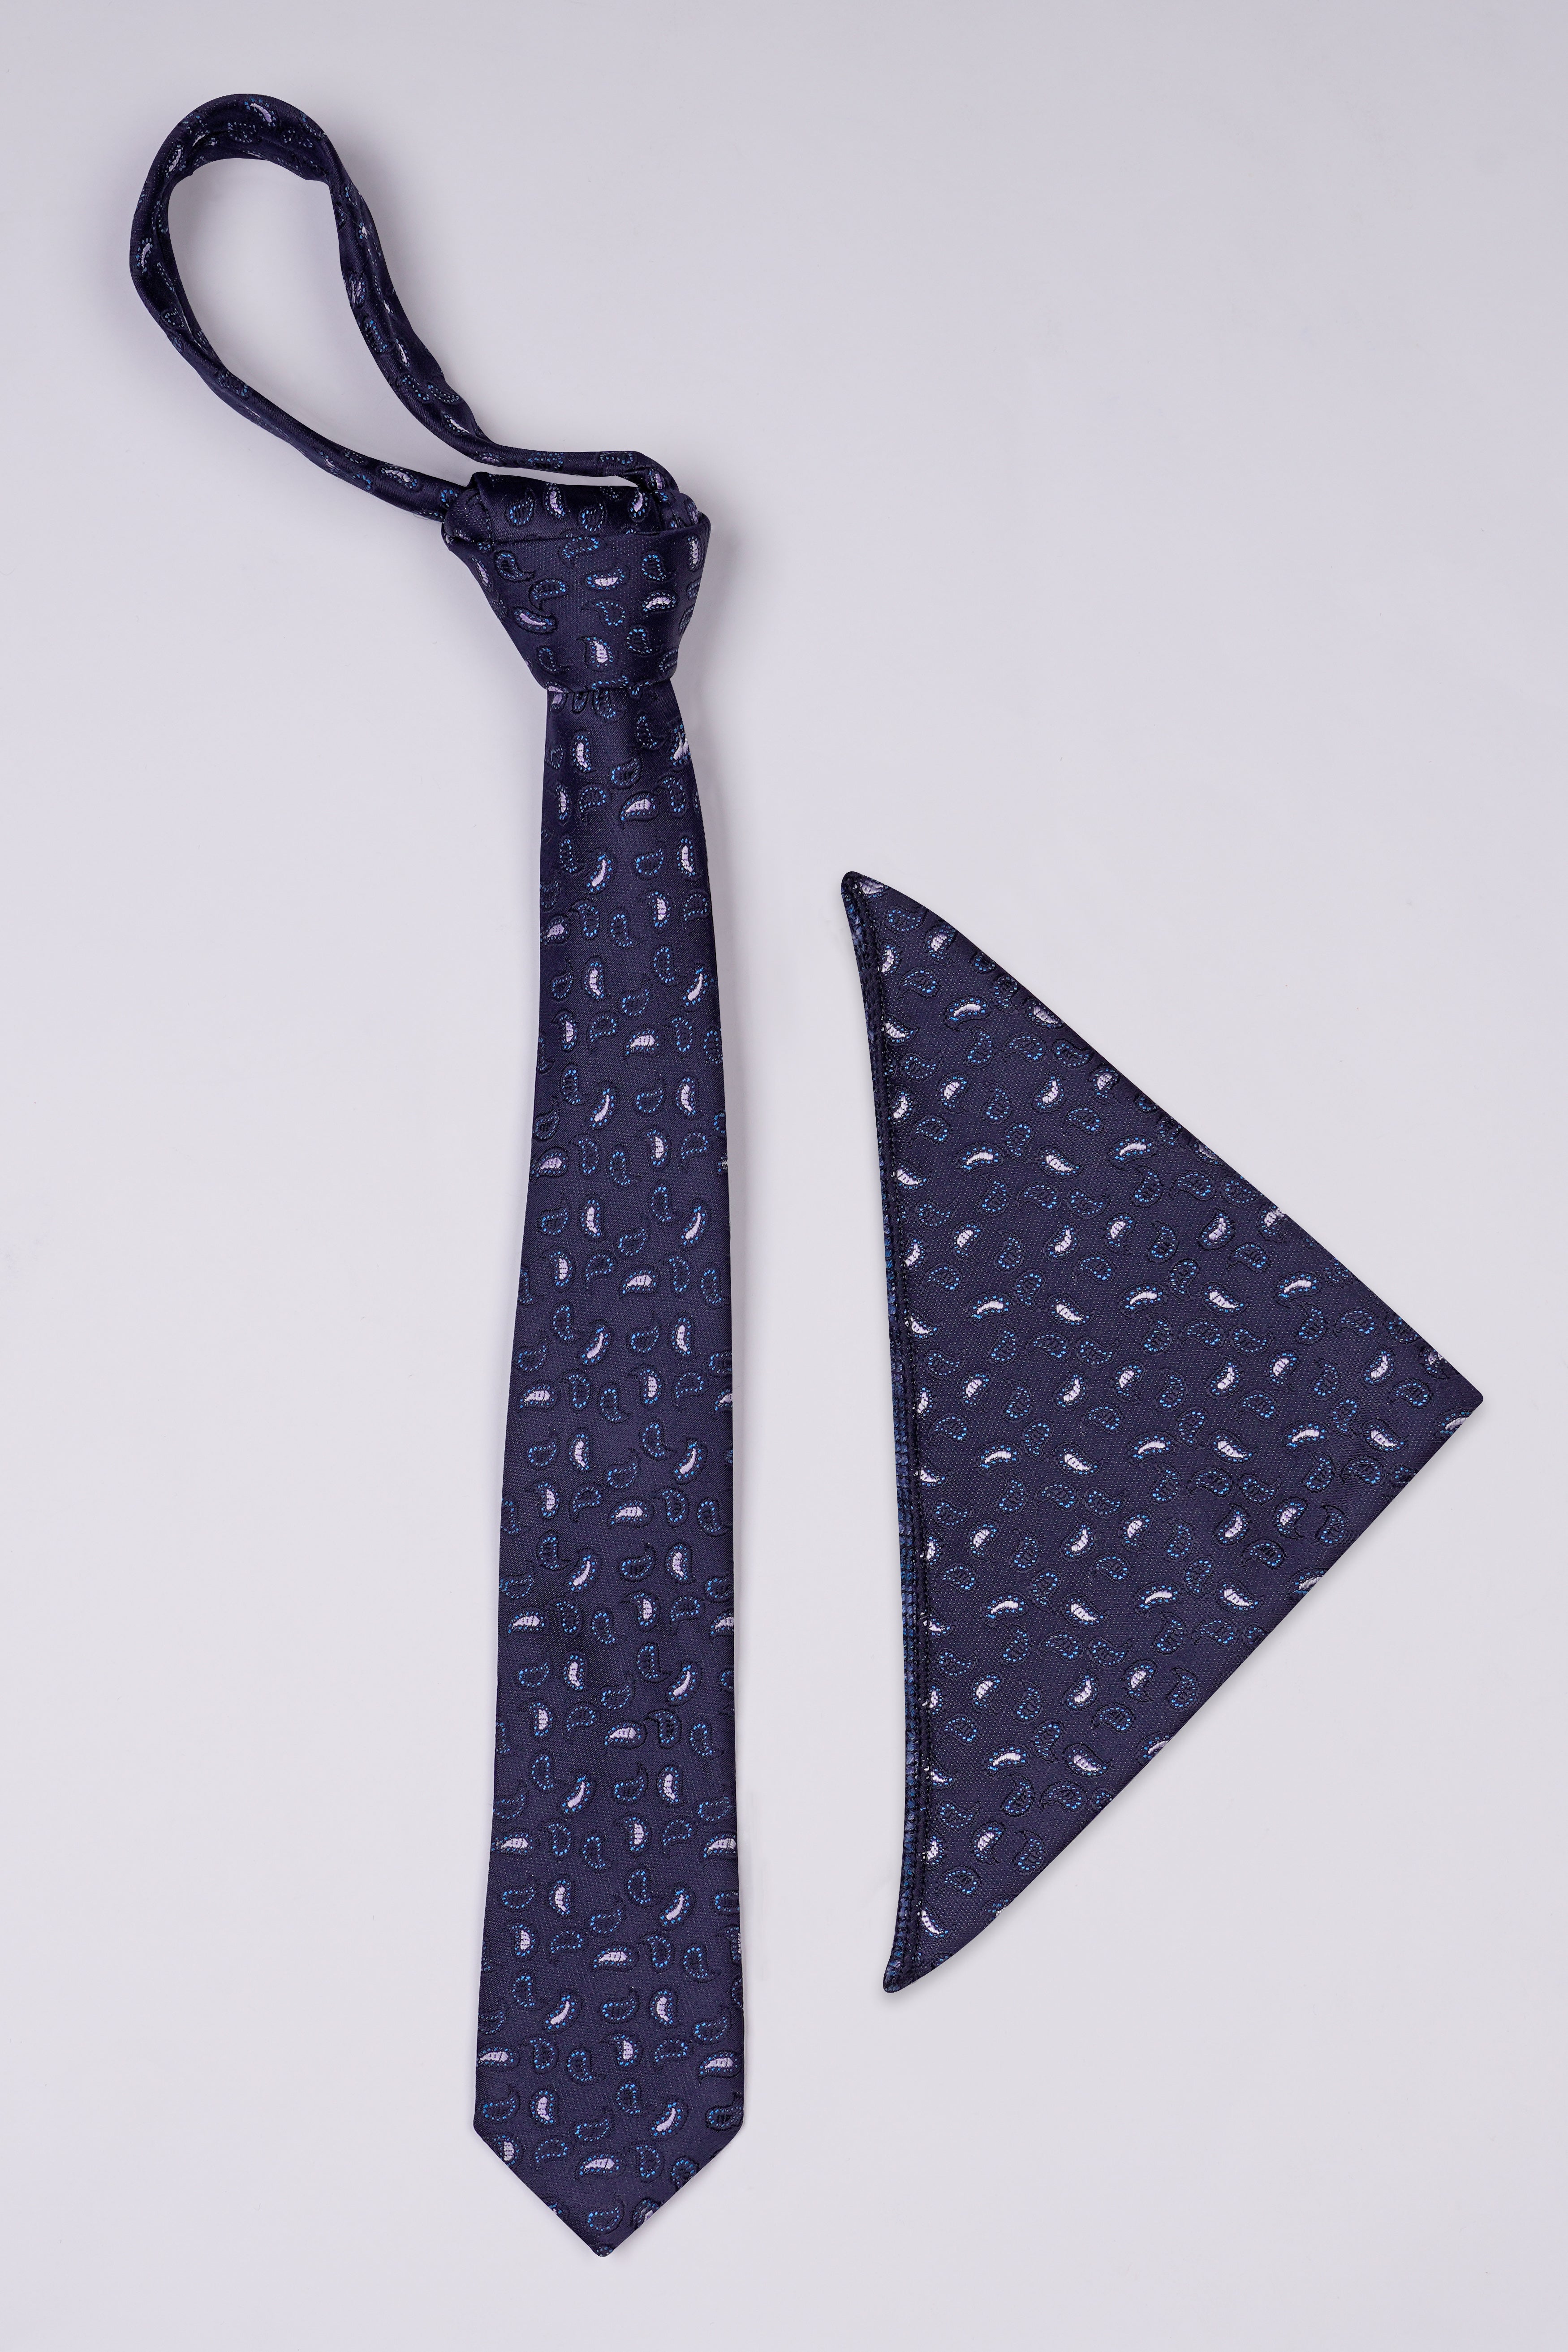 Martinique Navy Blue and White Paisley Jacquard Tie with Pocket Square  TP051